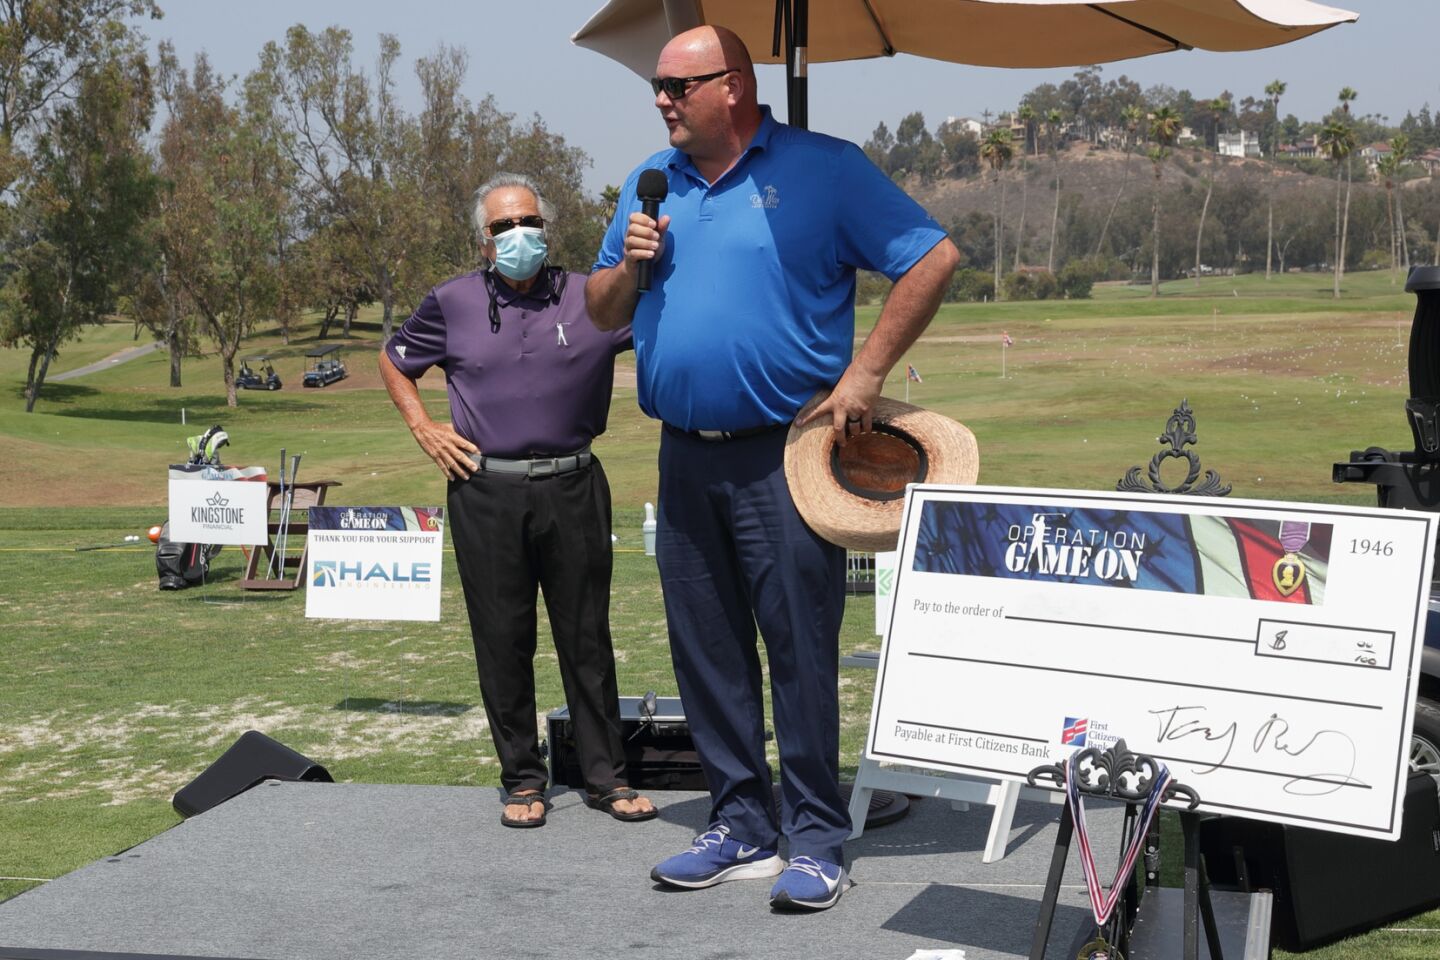 Chris Lesson of Del Mar Golf Center leads the National Anthem at the Operation Game On event